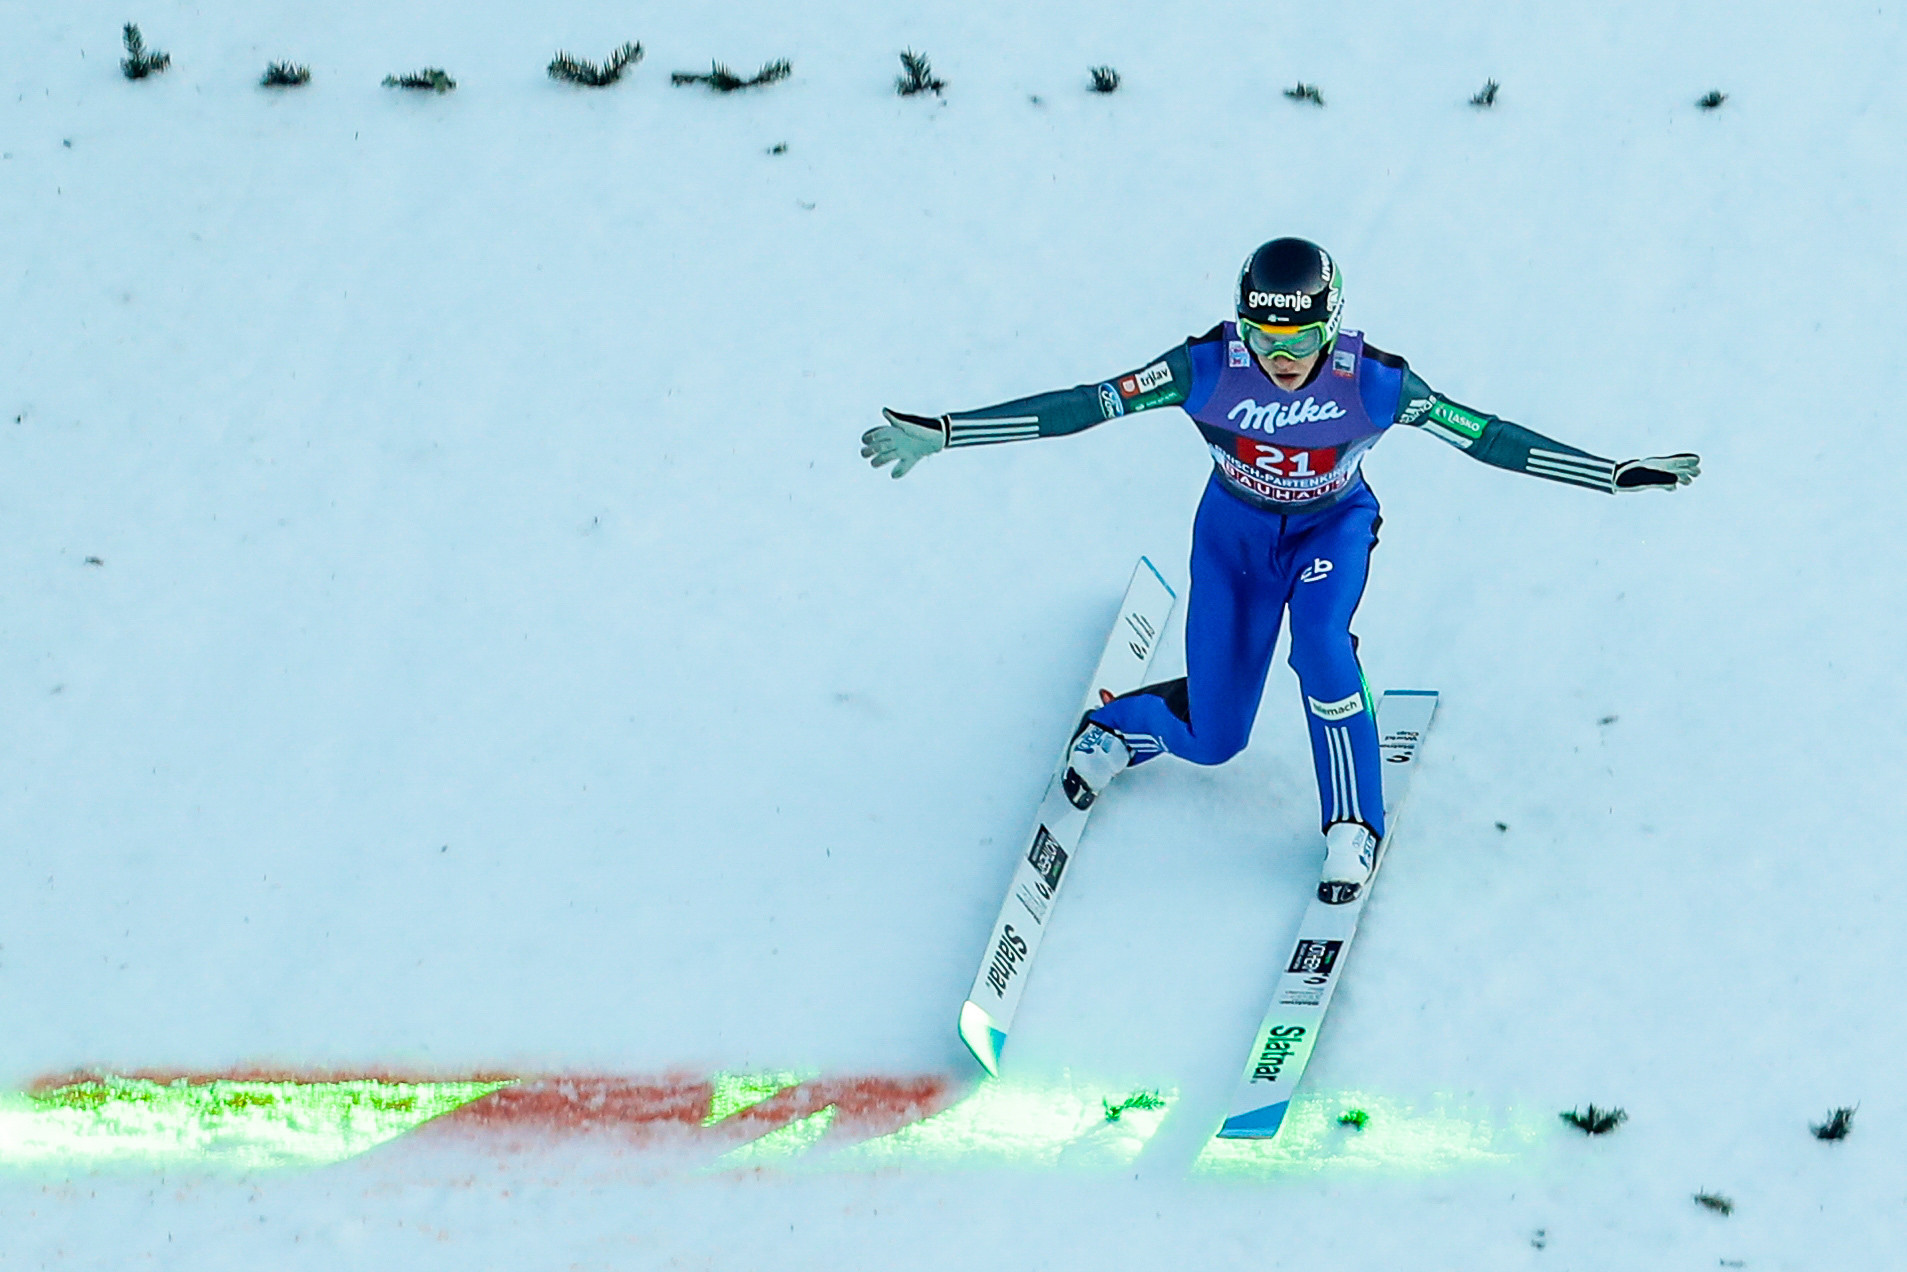 Slovenian Tilen Bartol was among two competitors to be disqualified for wearing the wrong suit ©Getty Images